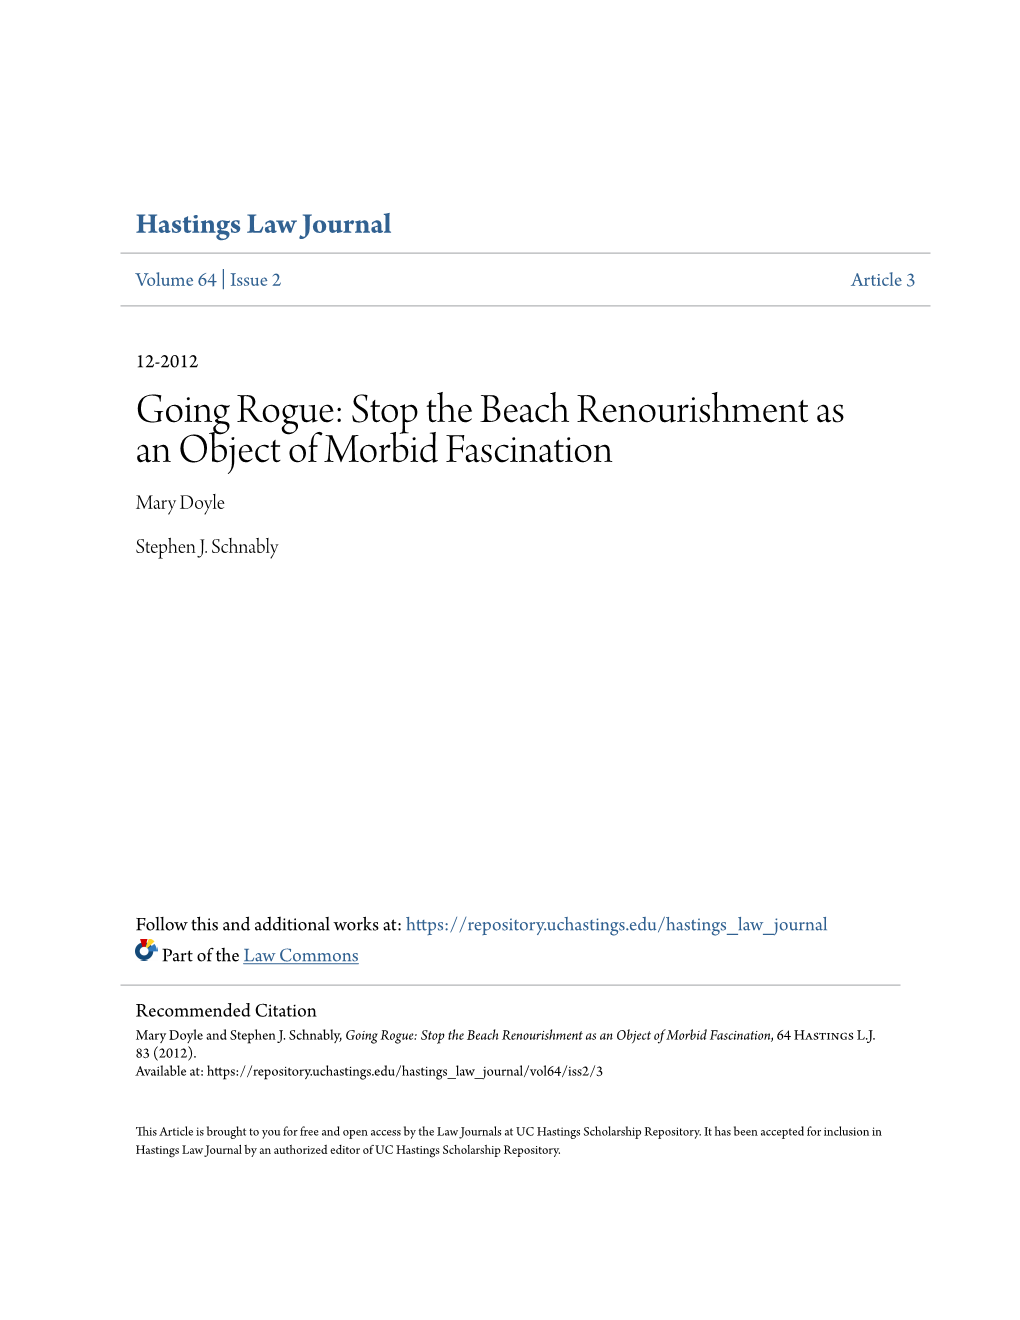 Going Rogue: Stop the Beach Renourishment As an Object of Morbid Fascination Mary Doyle